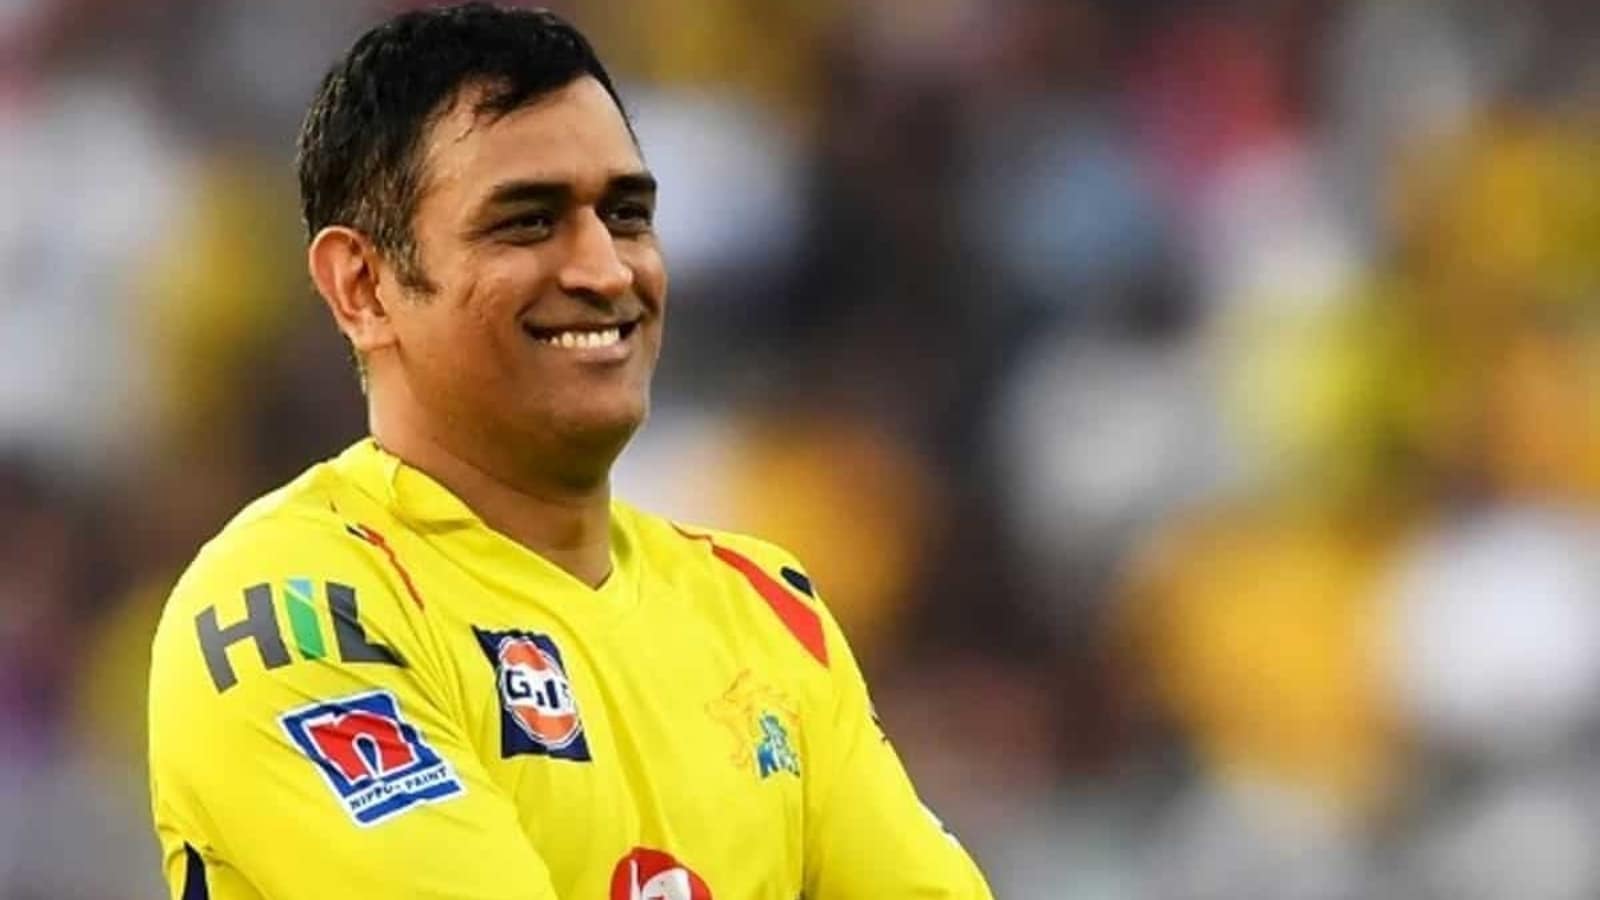 Great captain' MS Dhoni improves everyone's game: Moeen Ali 'excited' to play for CSK